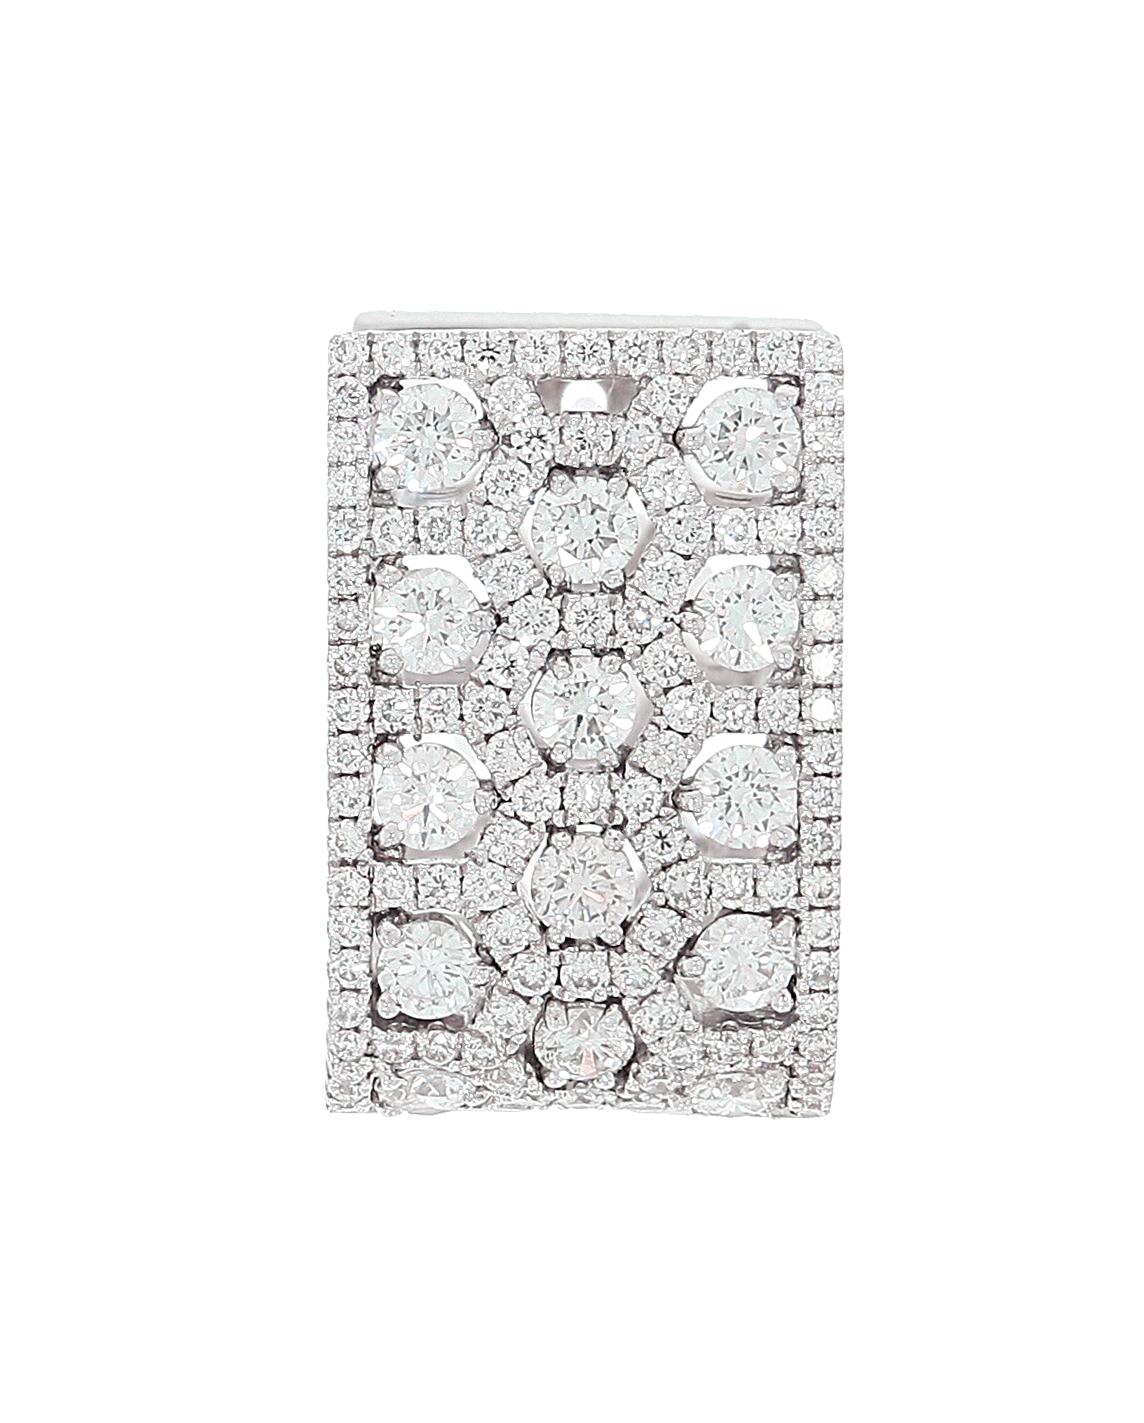 Simple and elegant rectangular shaped 18 carat white gold earrings by Chatila set with 240 diamonds totaling 3.24 carats. Can be worn modestly on any occasion. Each earring closes with a lever back.